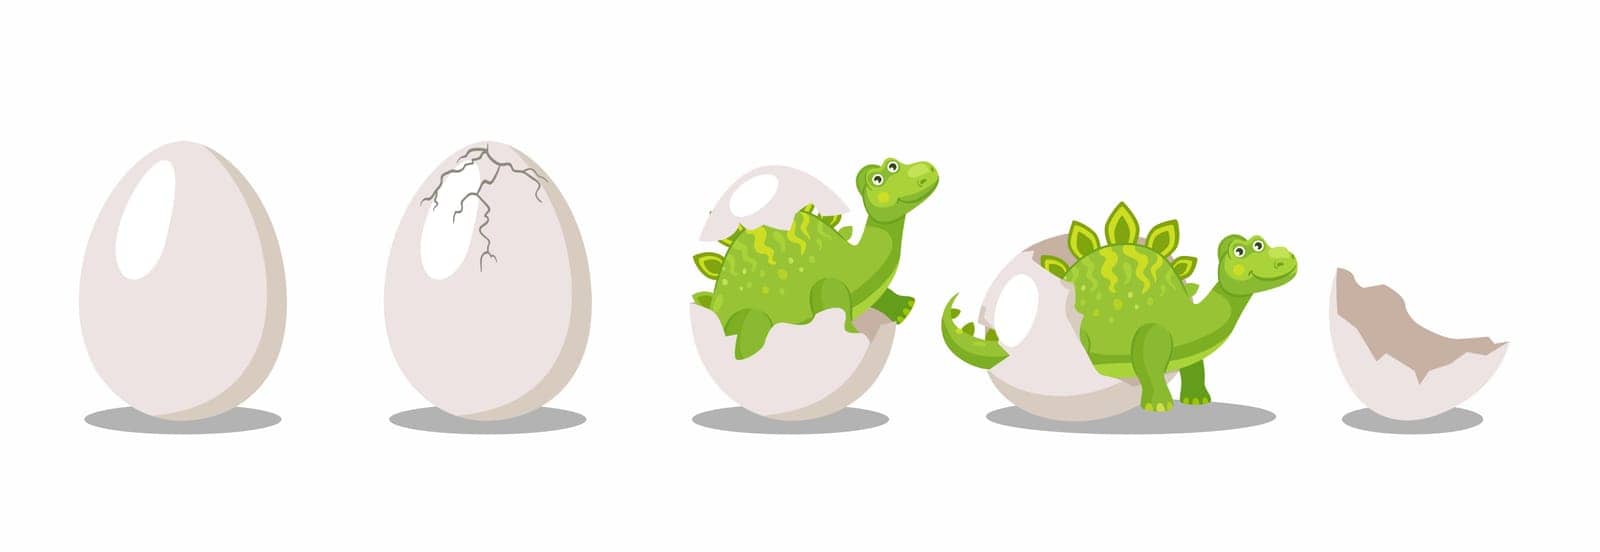 Stages of hatching dinosaur from egg cartoon illustration set by pchvector